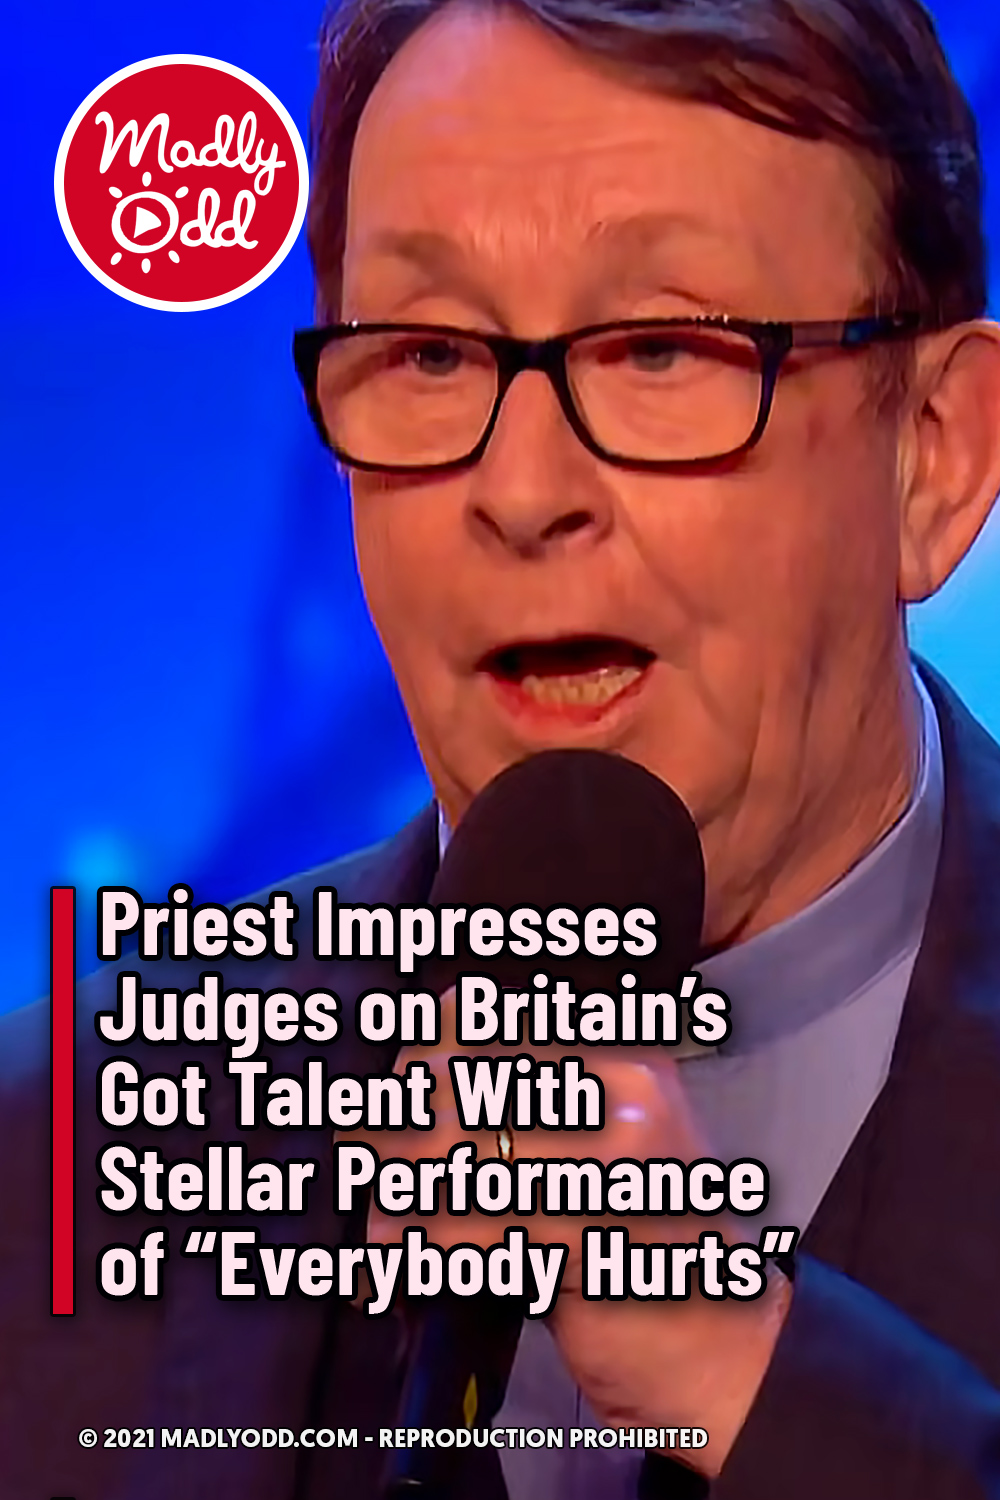 Priest Impresses Judges on Britain’s Got Talent With Stellar Performance of “Everybody Hurts”